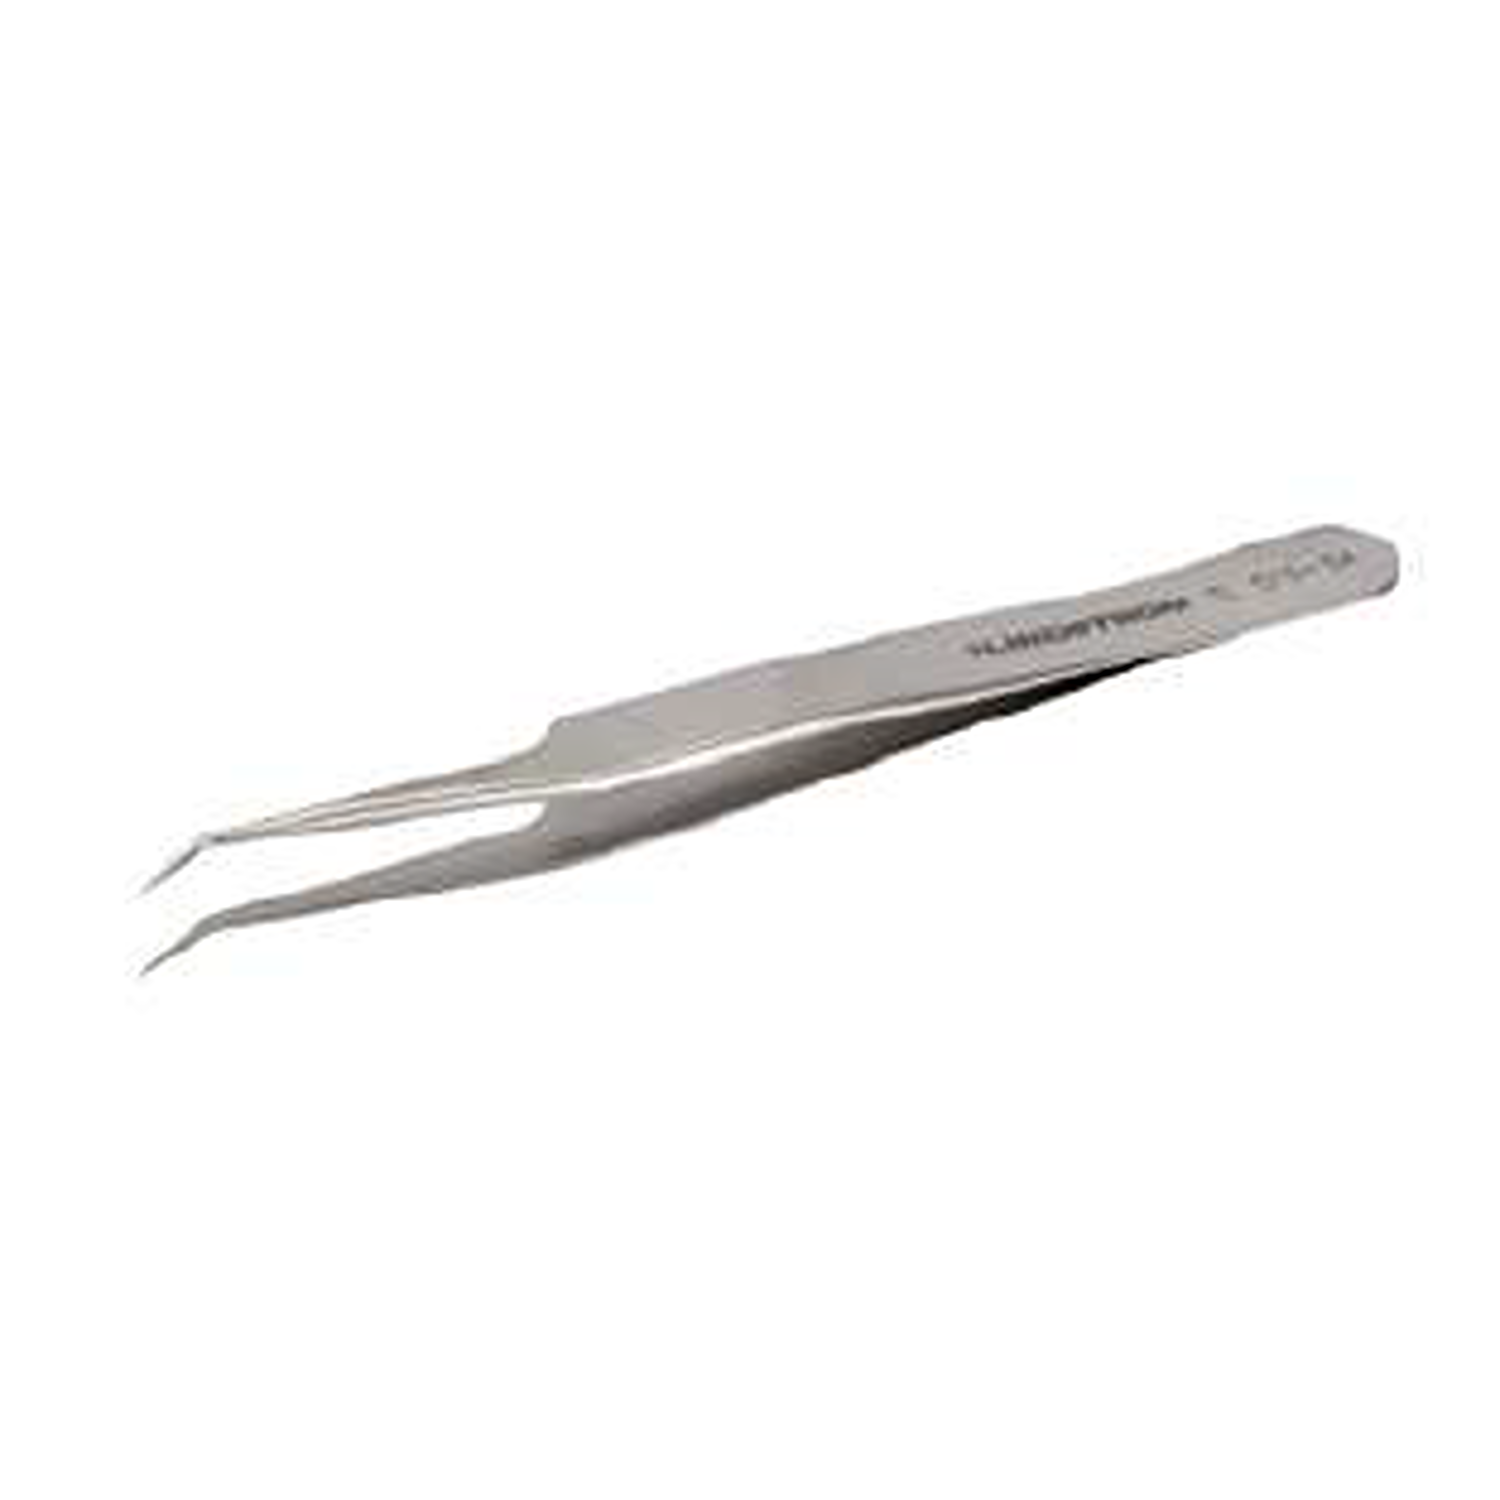 BAHCO TL 51S-SA Stainless Steel High Precision Tweezers - Premium Tweezers from BAHCO - Shop now at Yew Aik.